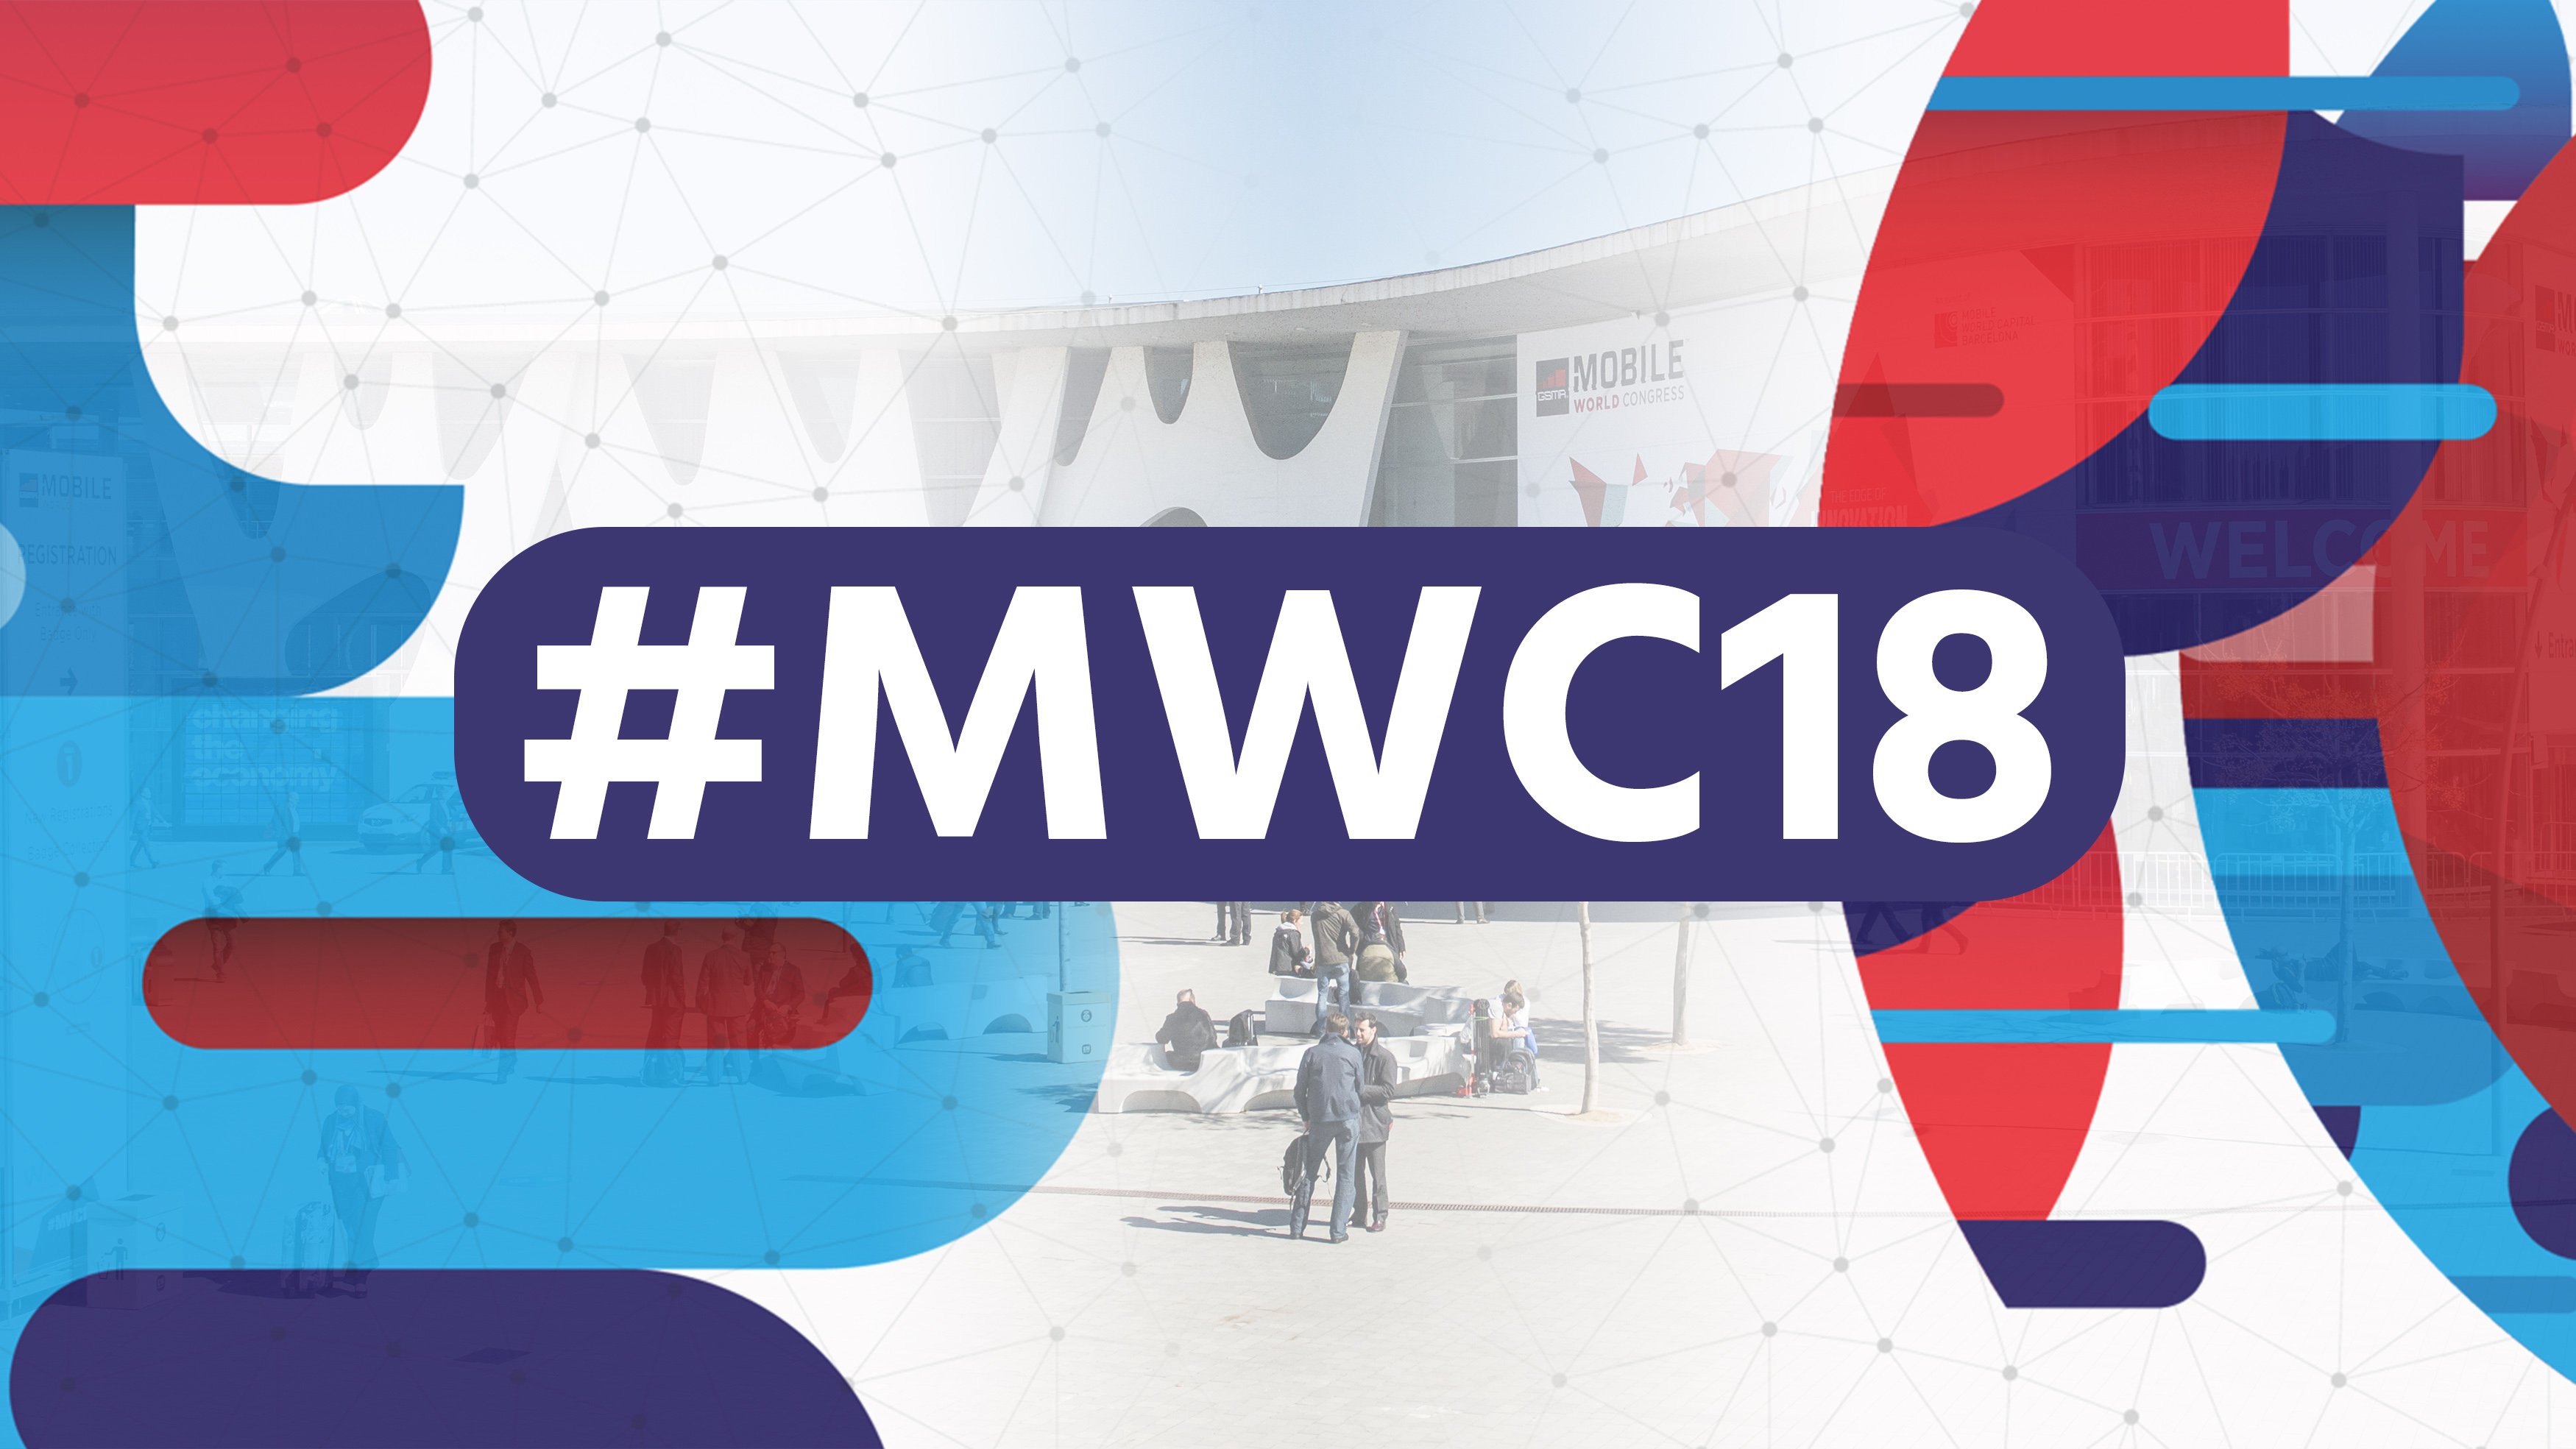 MWC – Mobile World Congress